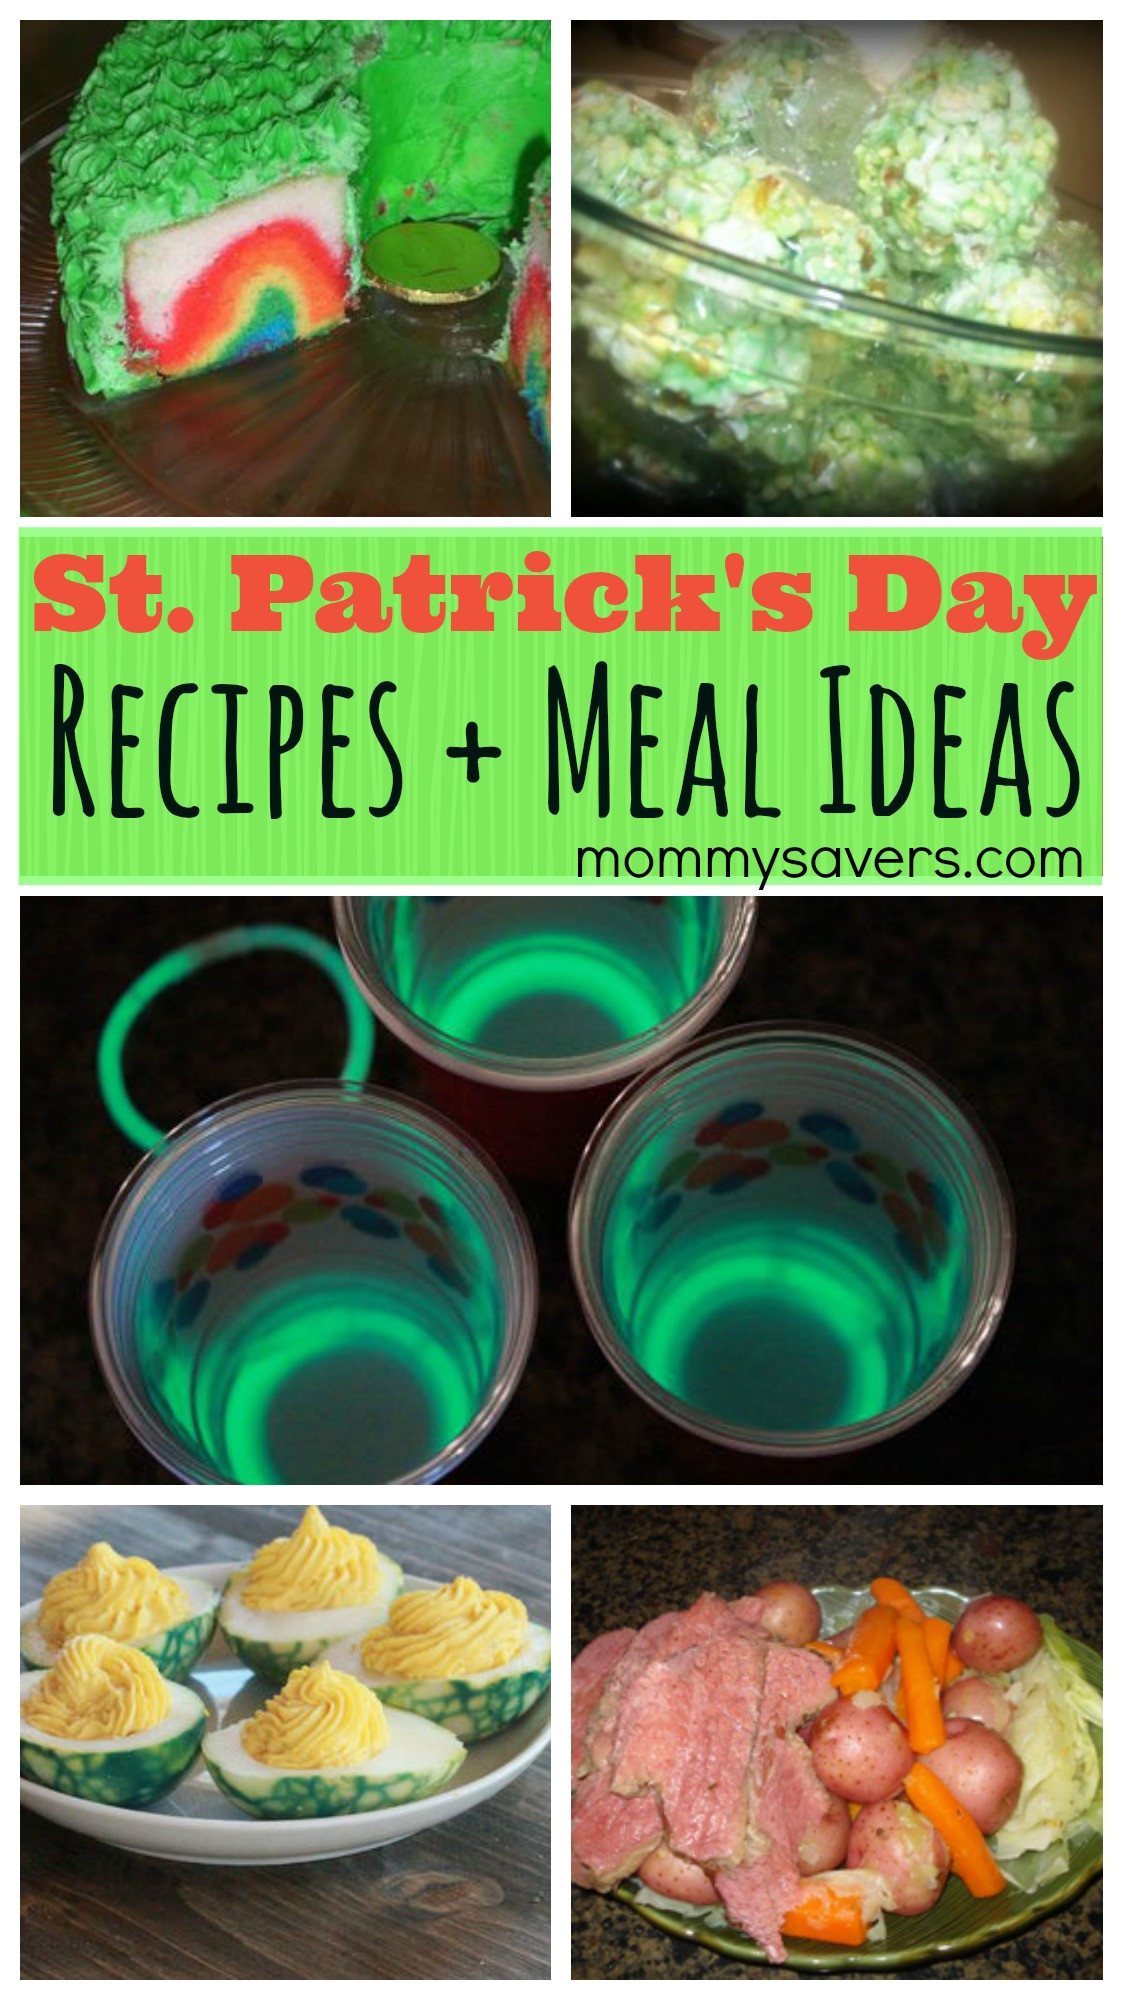 St Patrick's Day Brunch Ideas
 St Patrick s Day Recipes and Meal Ideas